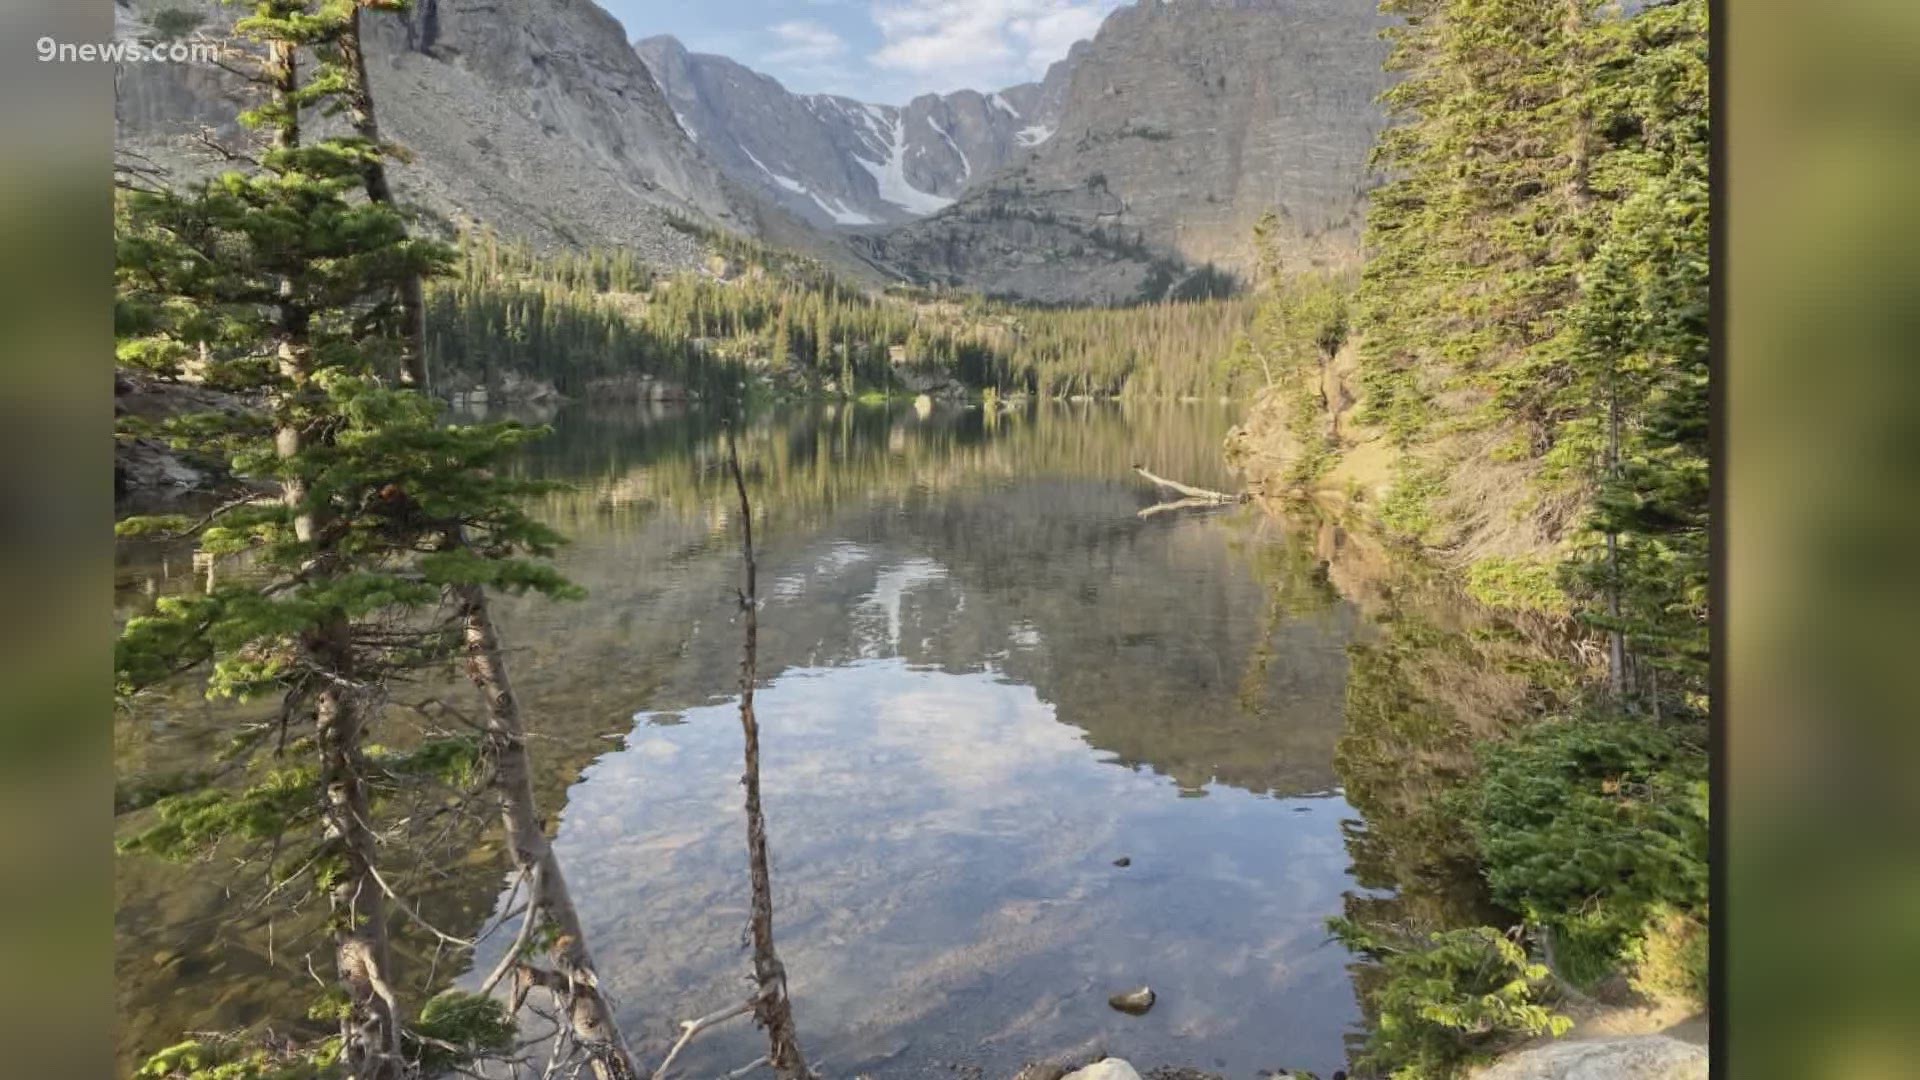 The hike to Sky Pond in Rocky Mountain National Park is difficult but has amazing views.